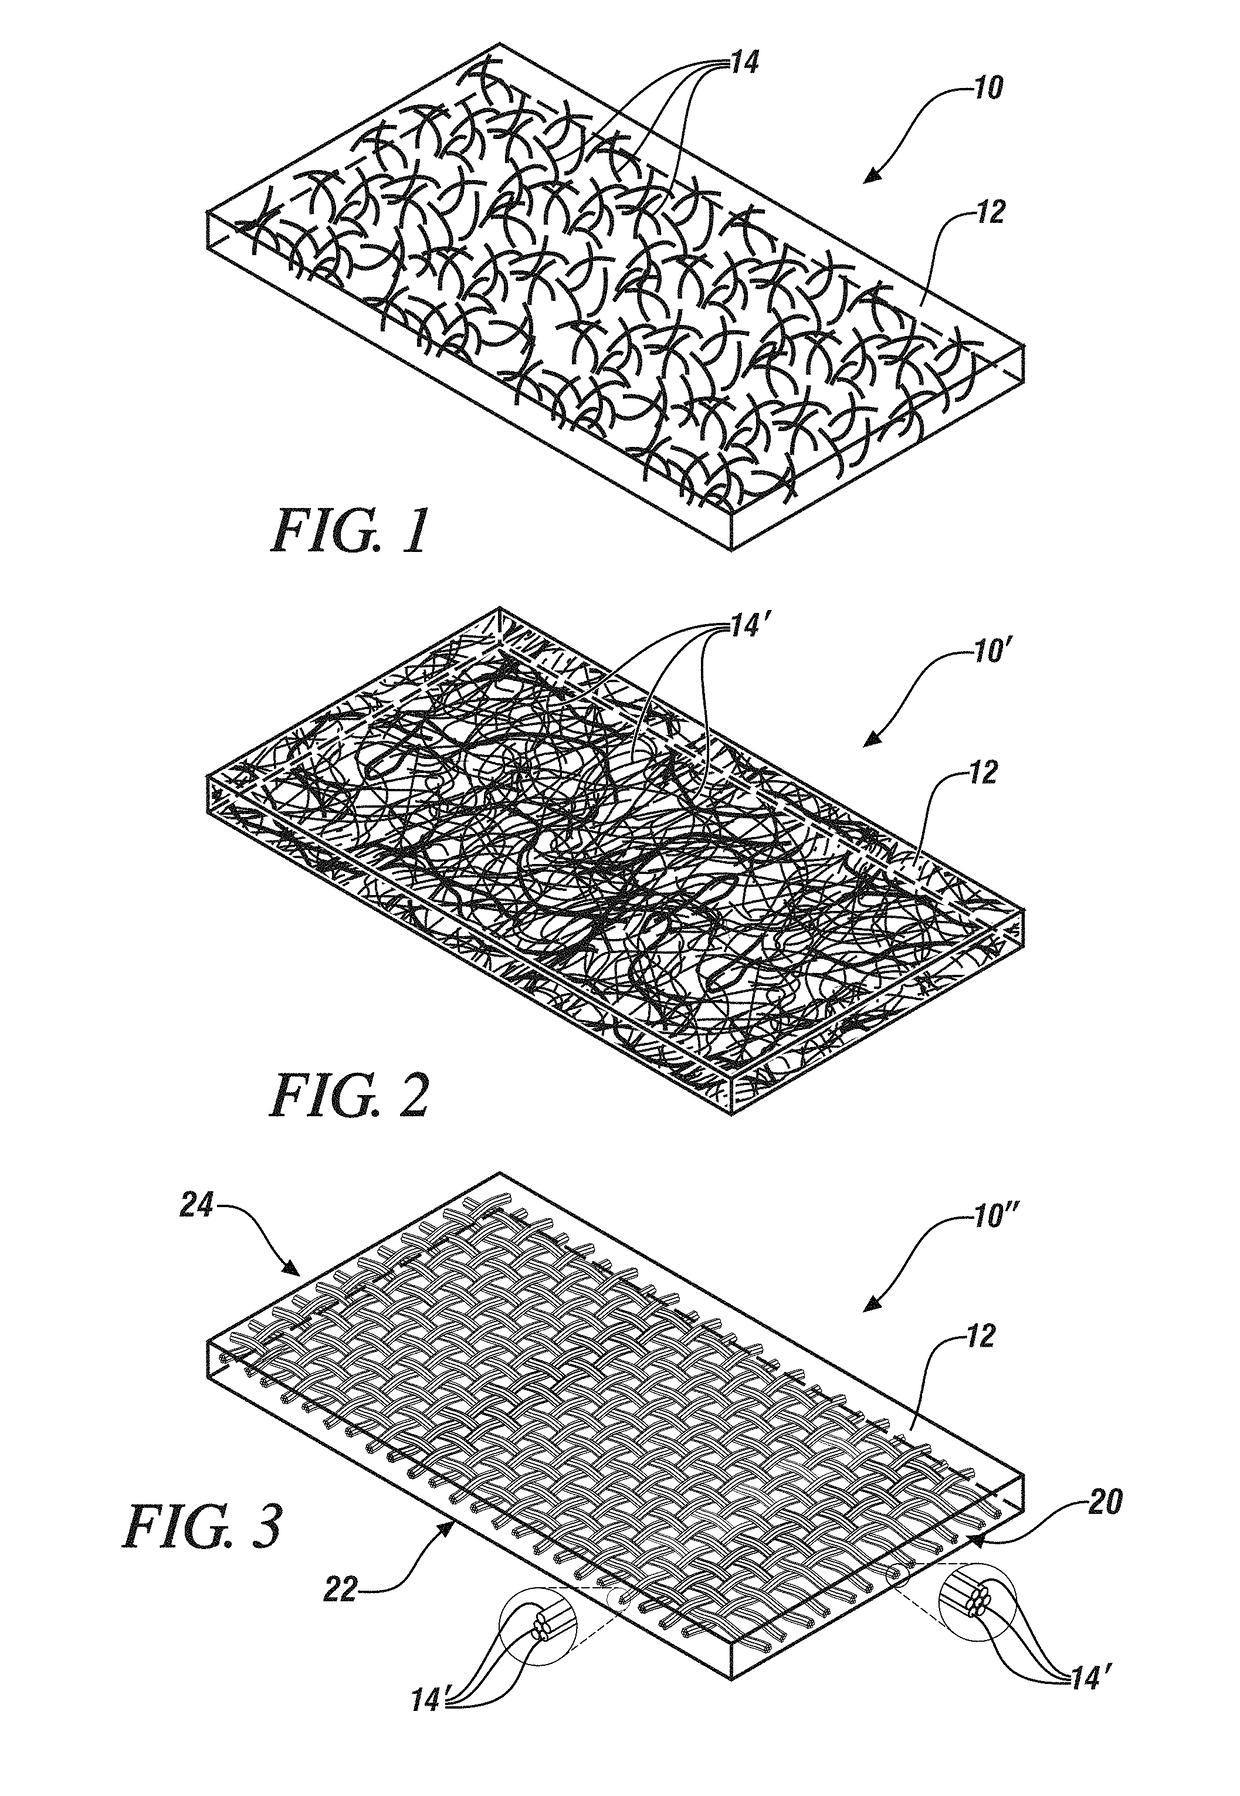 Ionically-conductive reinforced glass ceramic separators/solid electrolytes